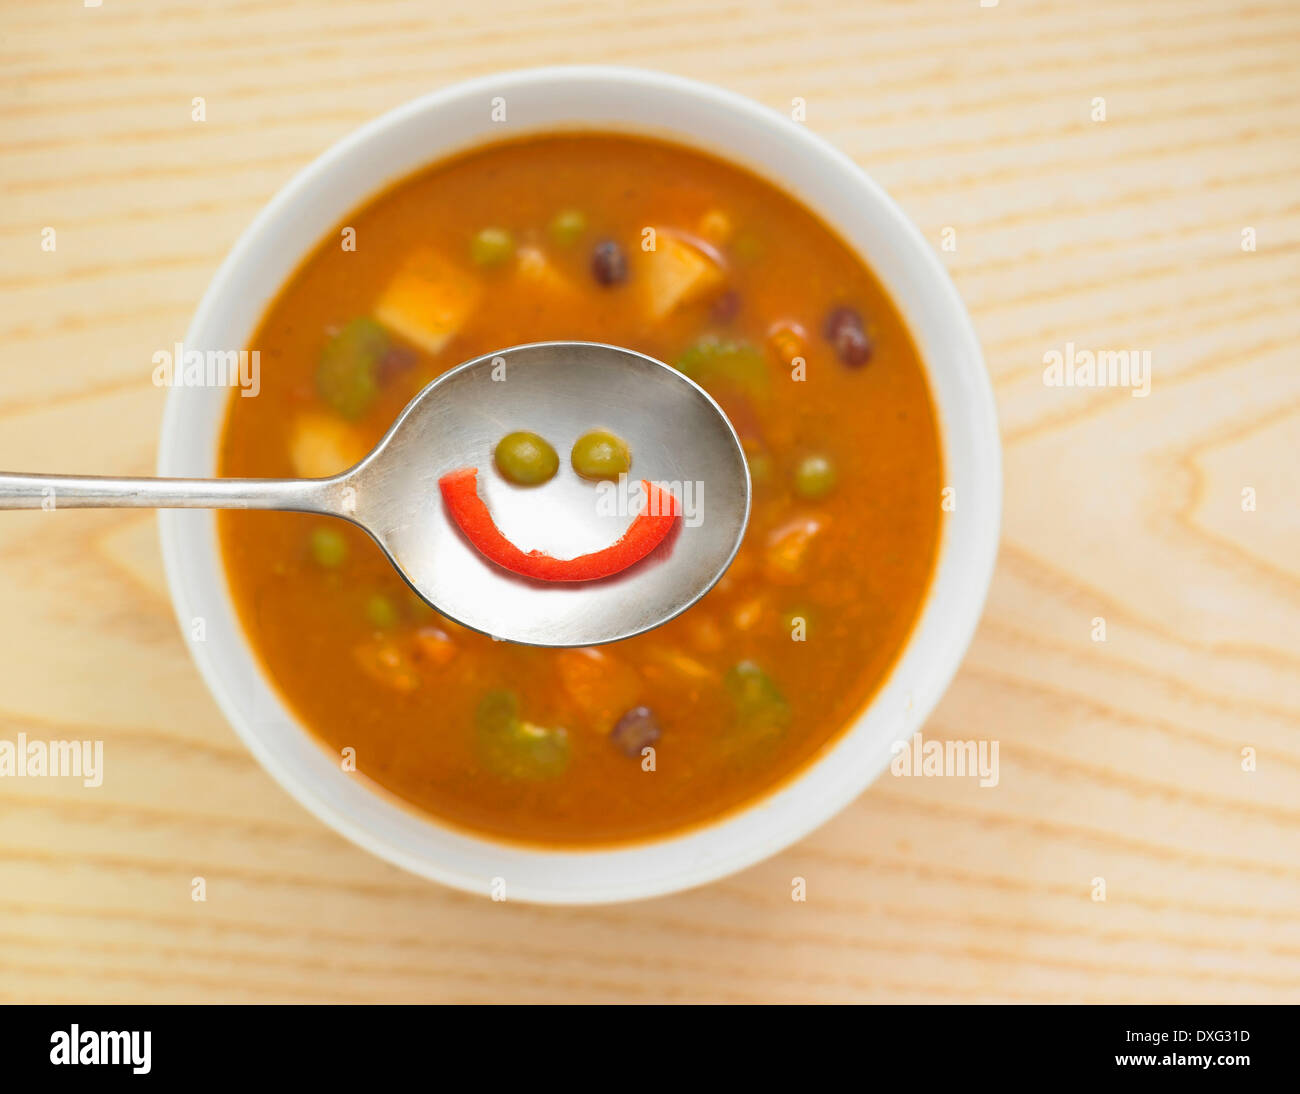 Smiling Face In Spoon Of Vegetable Soup Stock Photo